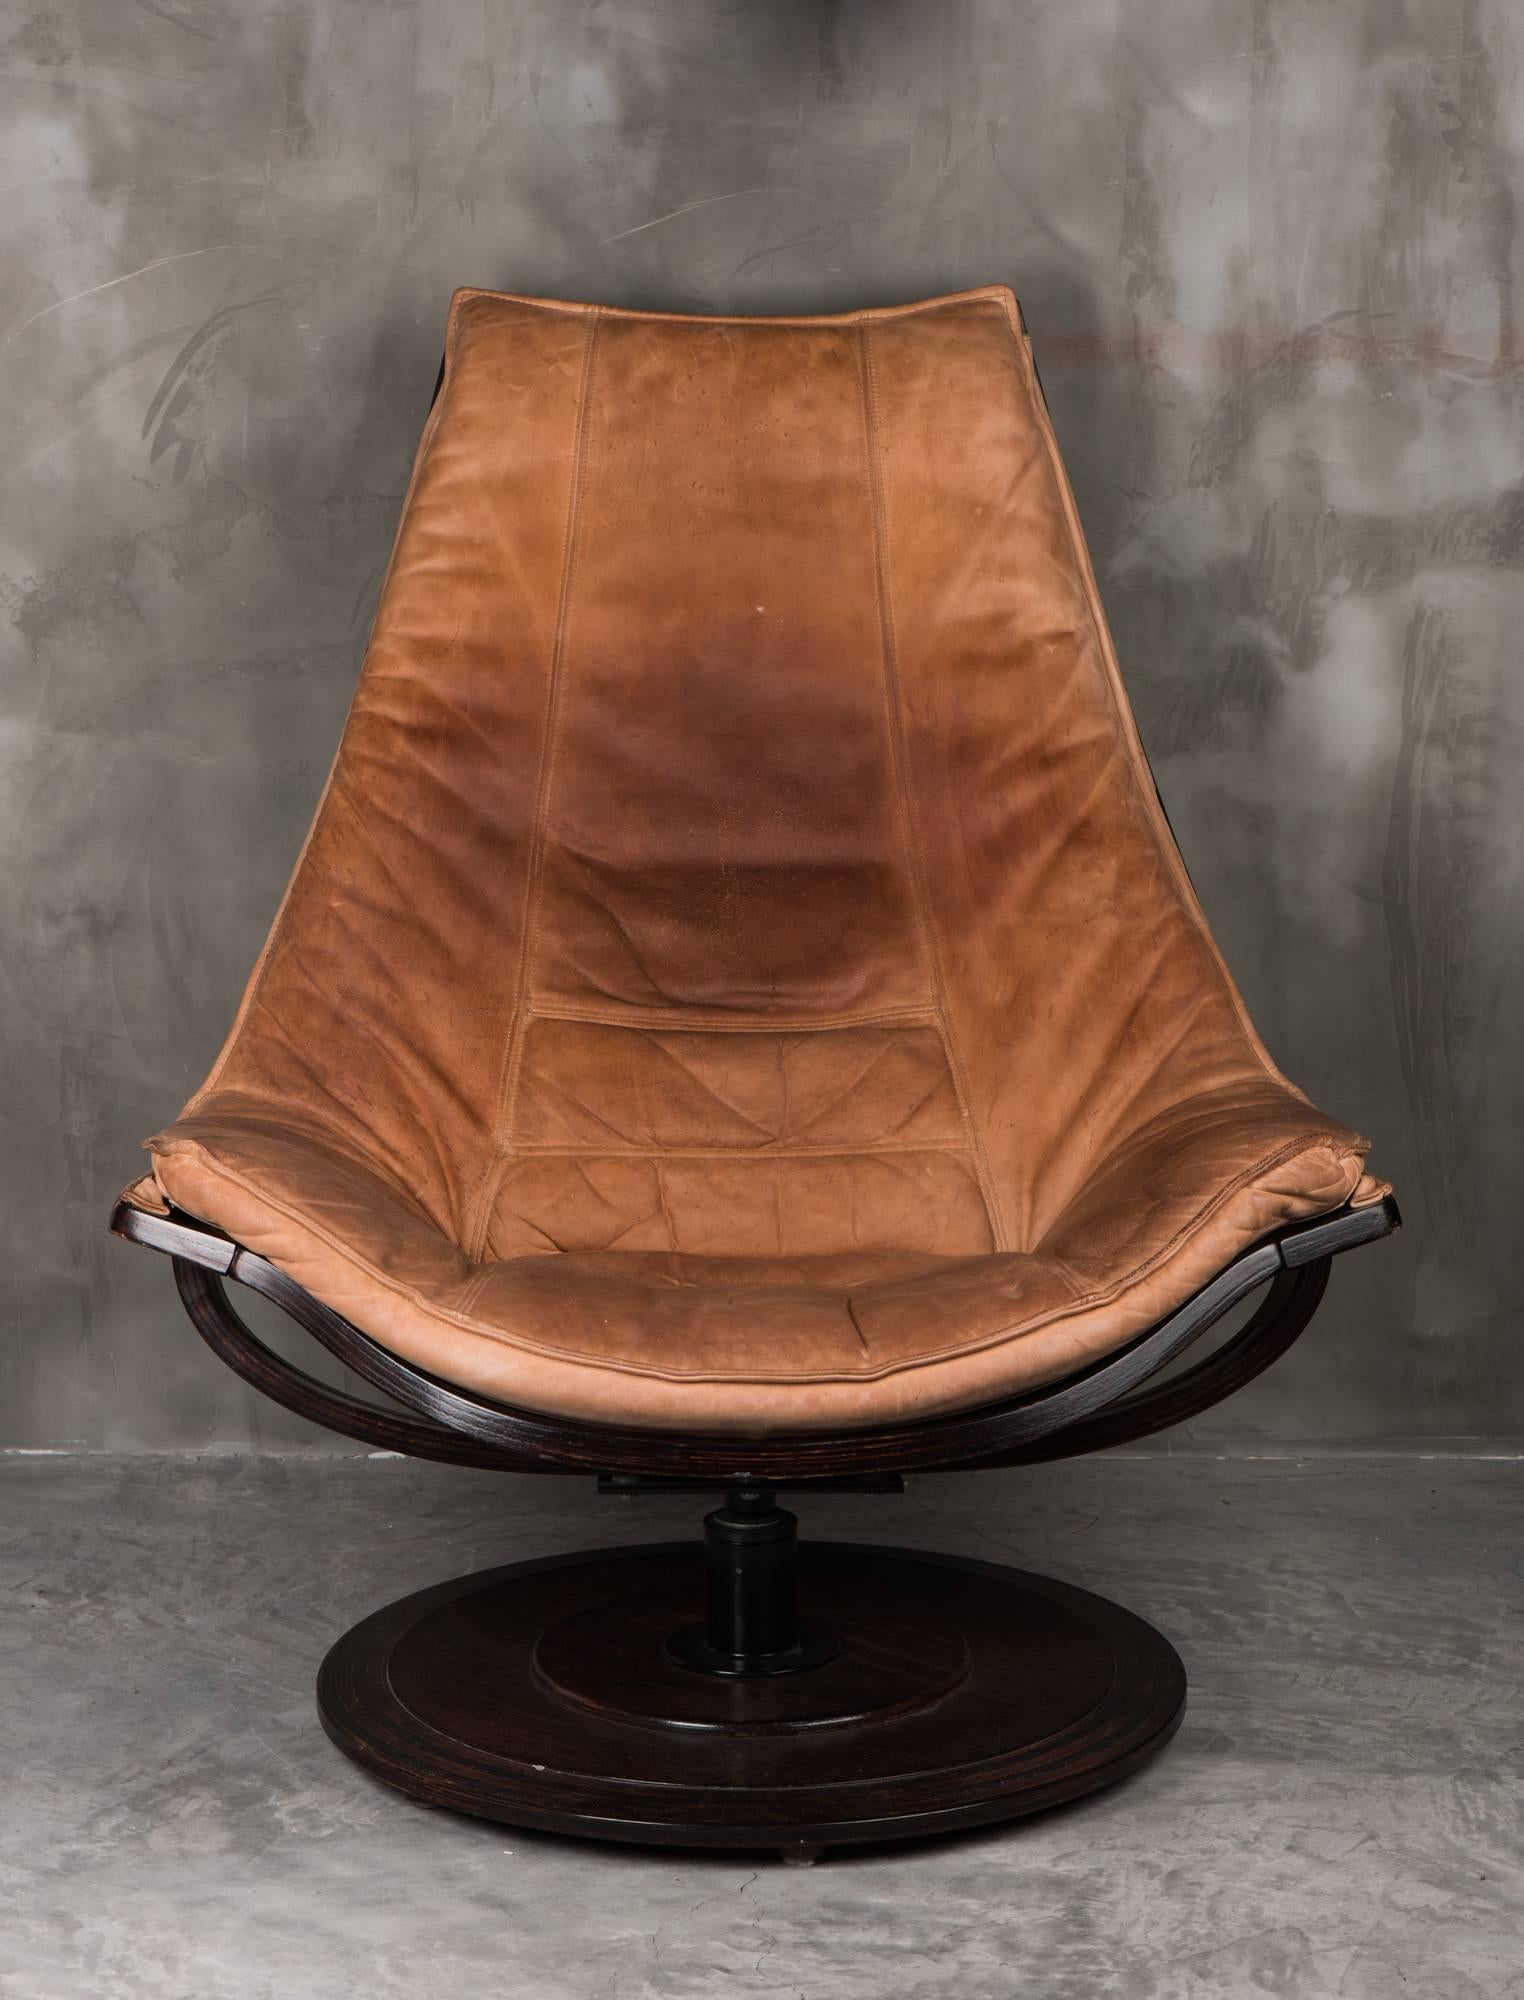 Uber cool tan leather swivel lounge chair by OM Designs Takashi Okamura and Erik Marquardsen, for NELO. Made in Sweden. 
Upholstered in tan leather. Stained, wooden beech frame on circular base. The swivel action is smooth, no problems. 
The